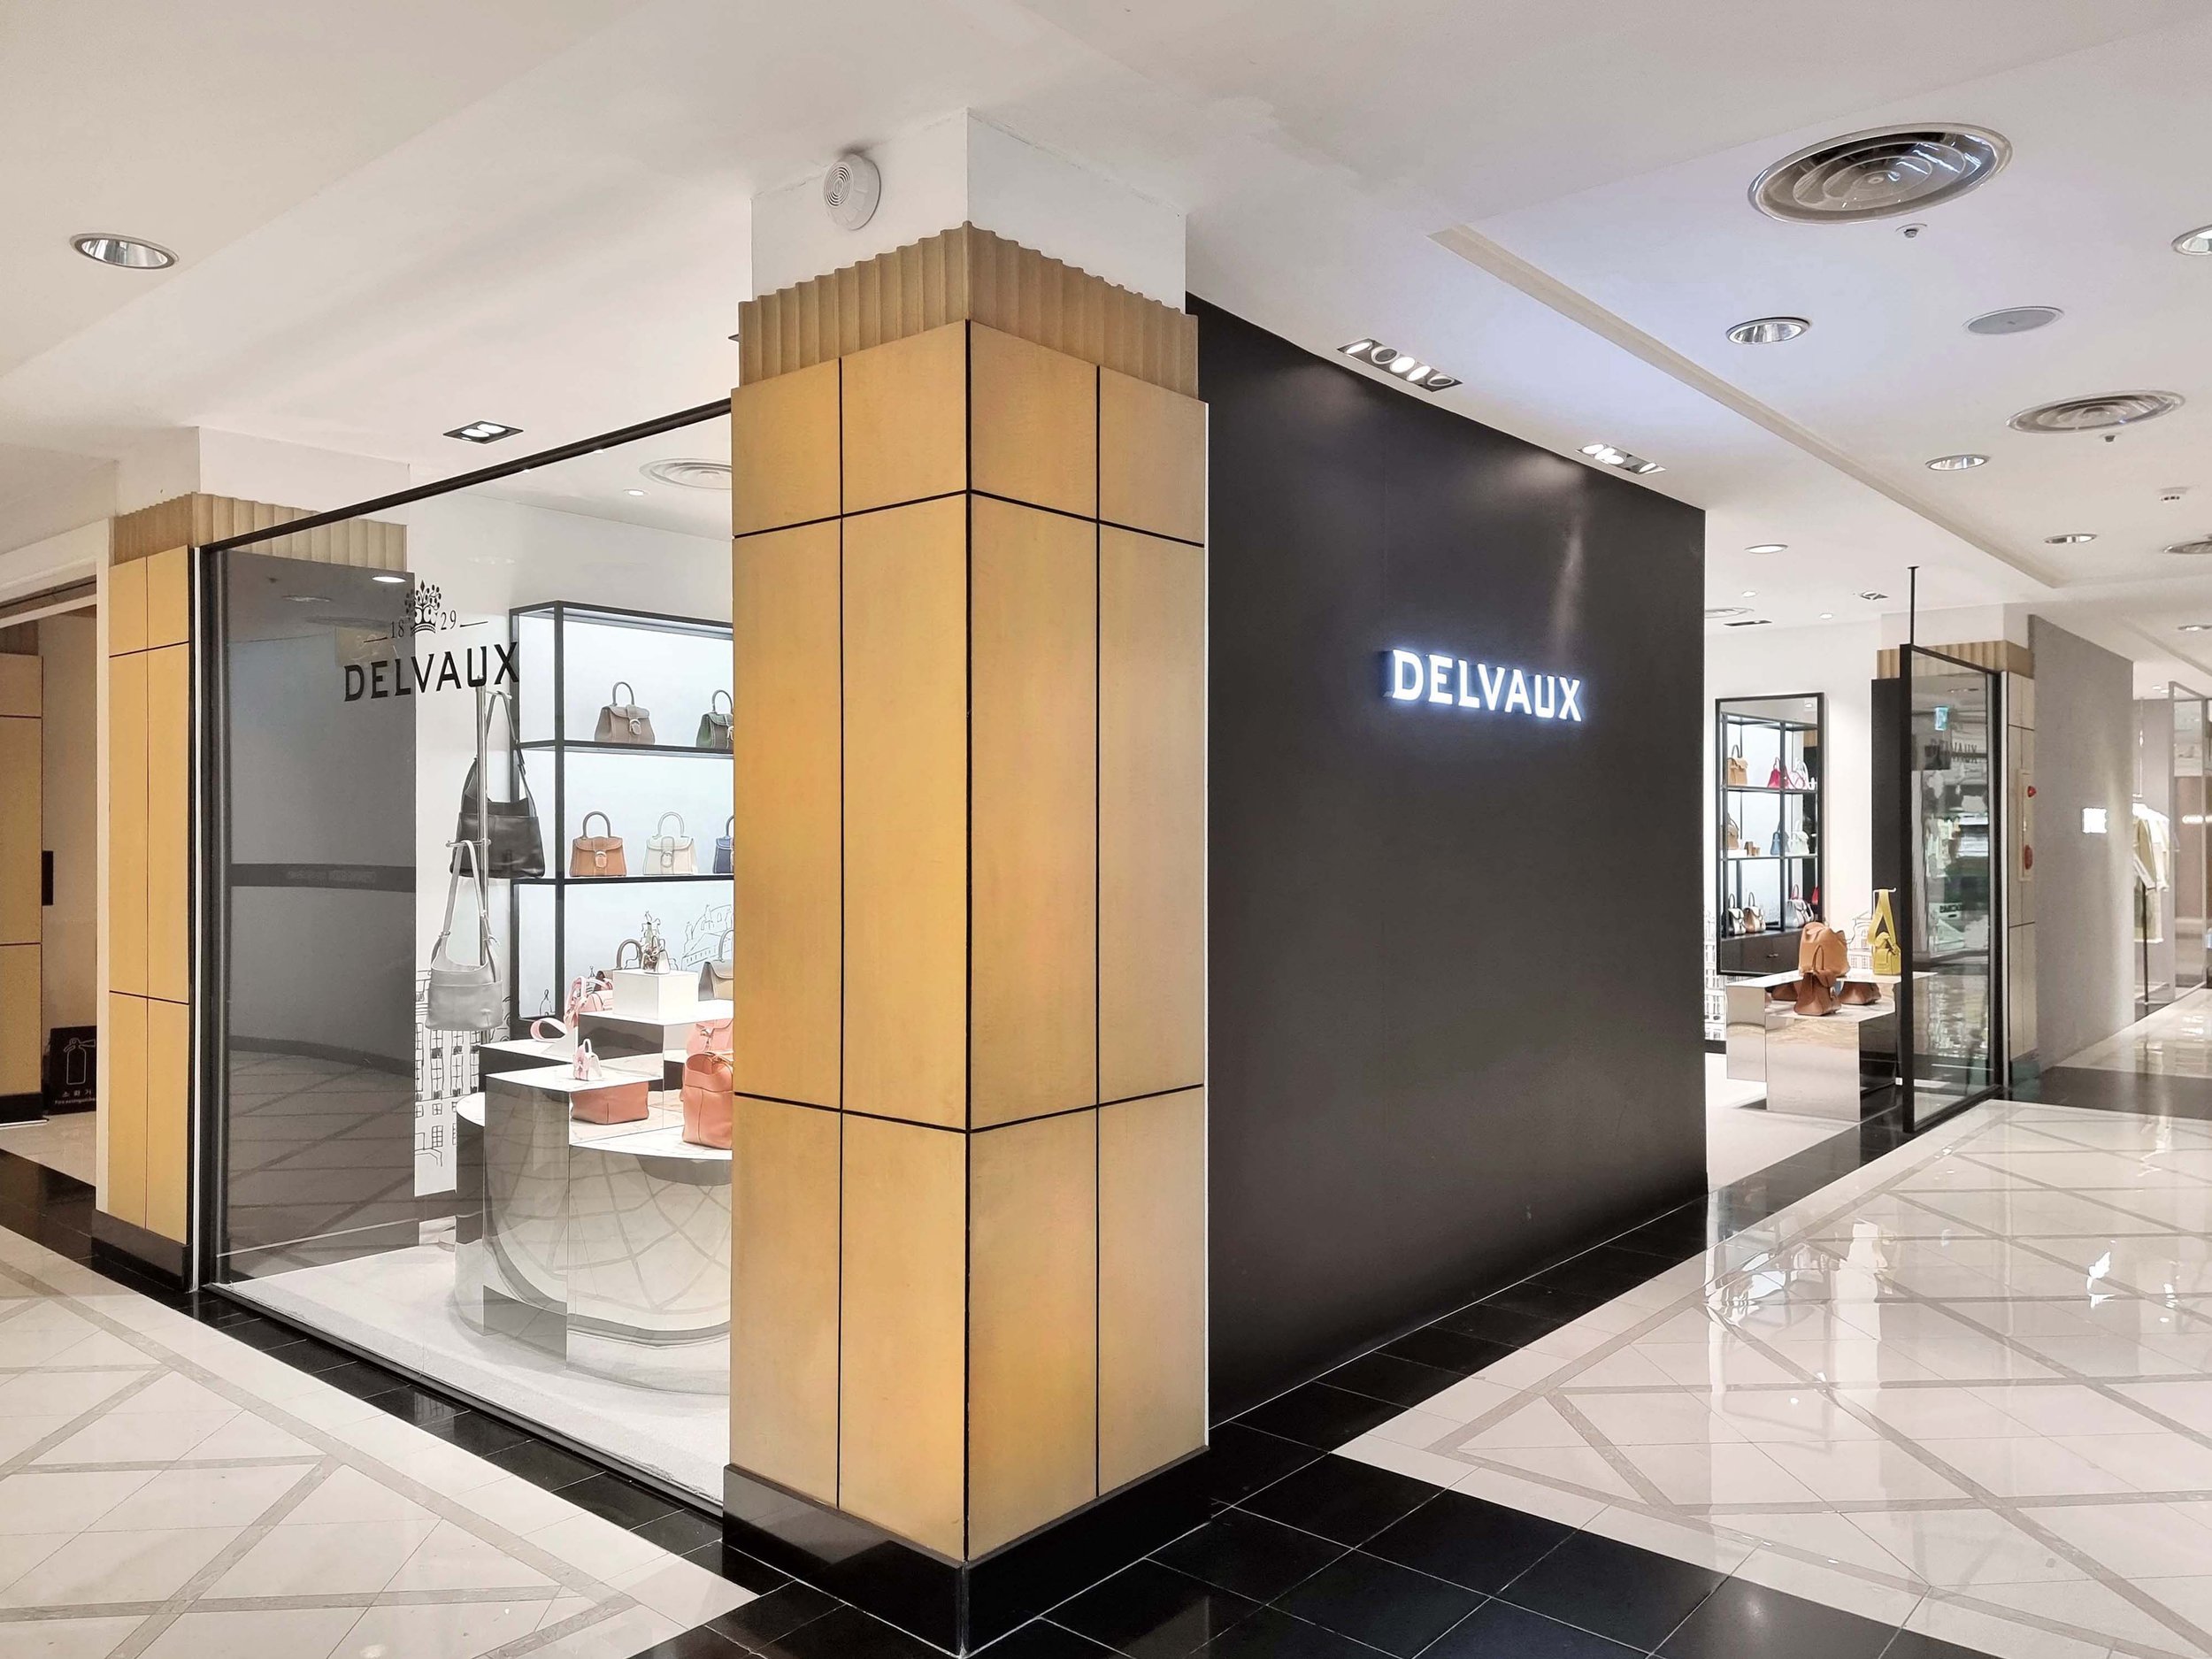 Delvaux - For Delvaux's Pop-Up store and boutique space